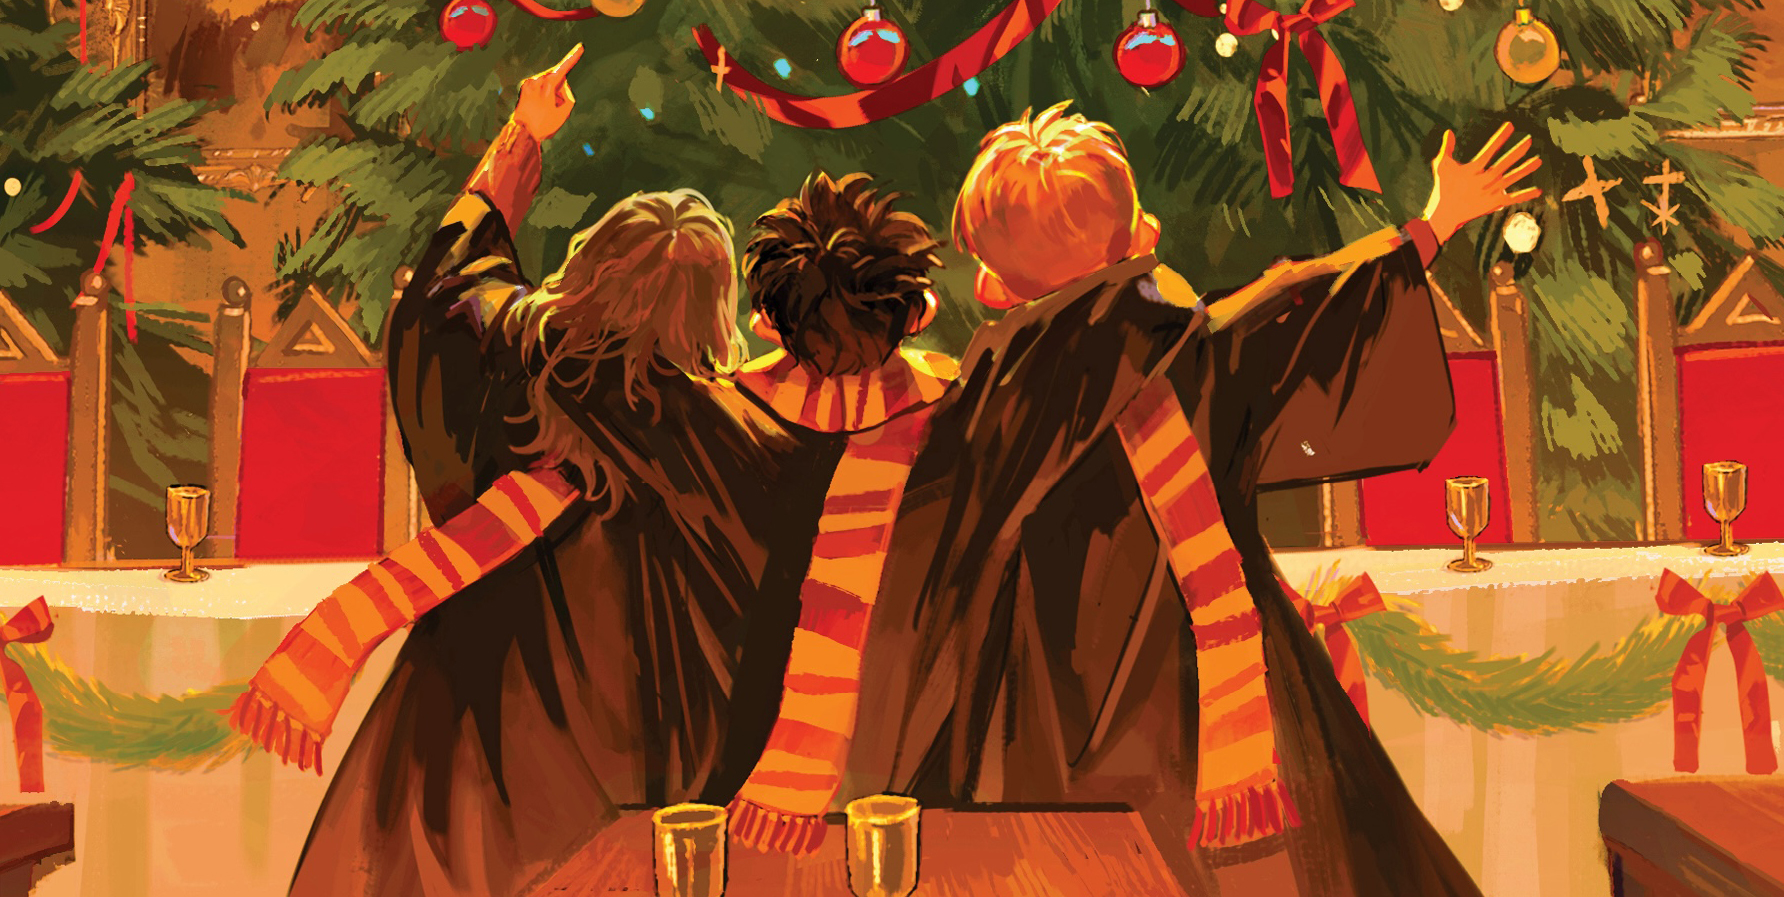 Upcoming Illustrated Book “Christmas Magic at Hogwarts” Set to Release in 2024